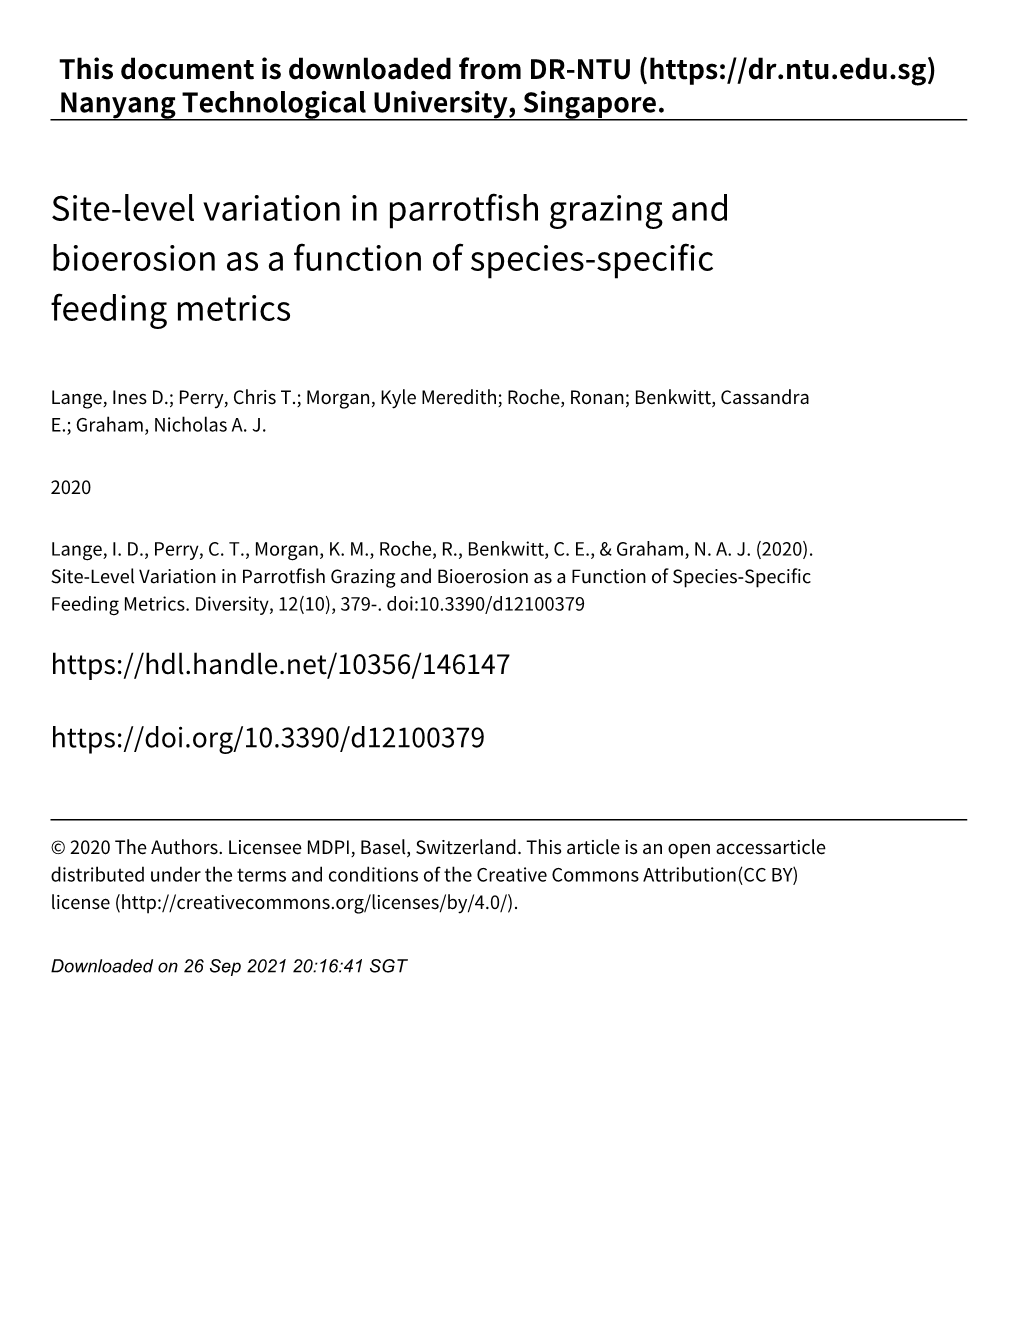 Site‑Level Variation in Parrotfish Grazing and Bioerosion As a Function of Species‑Specific Feeding Metrics